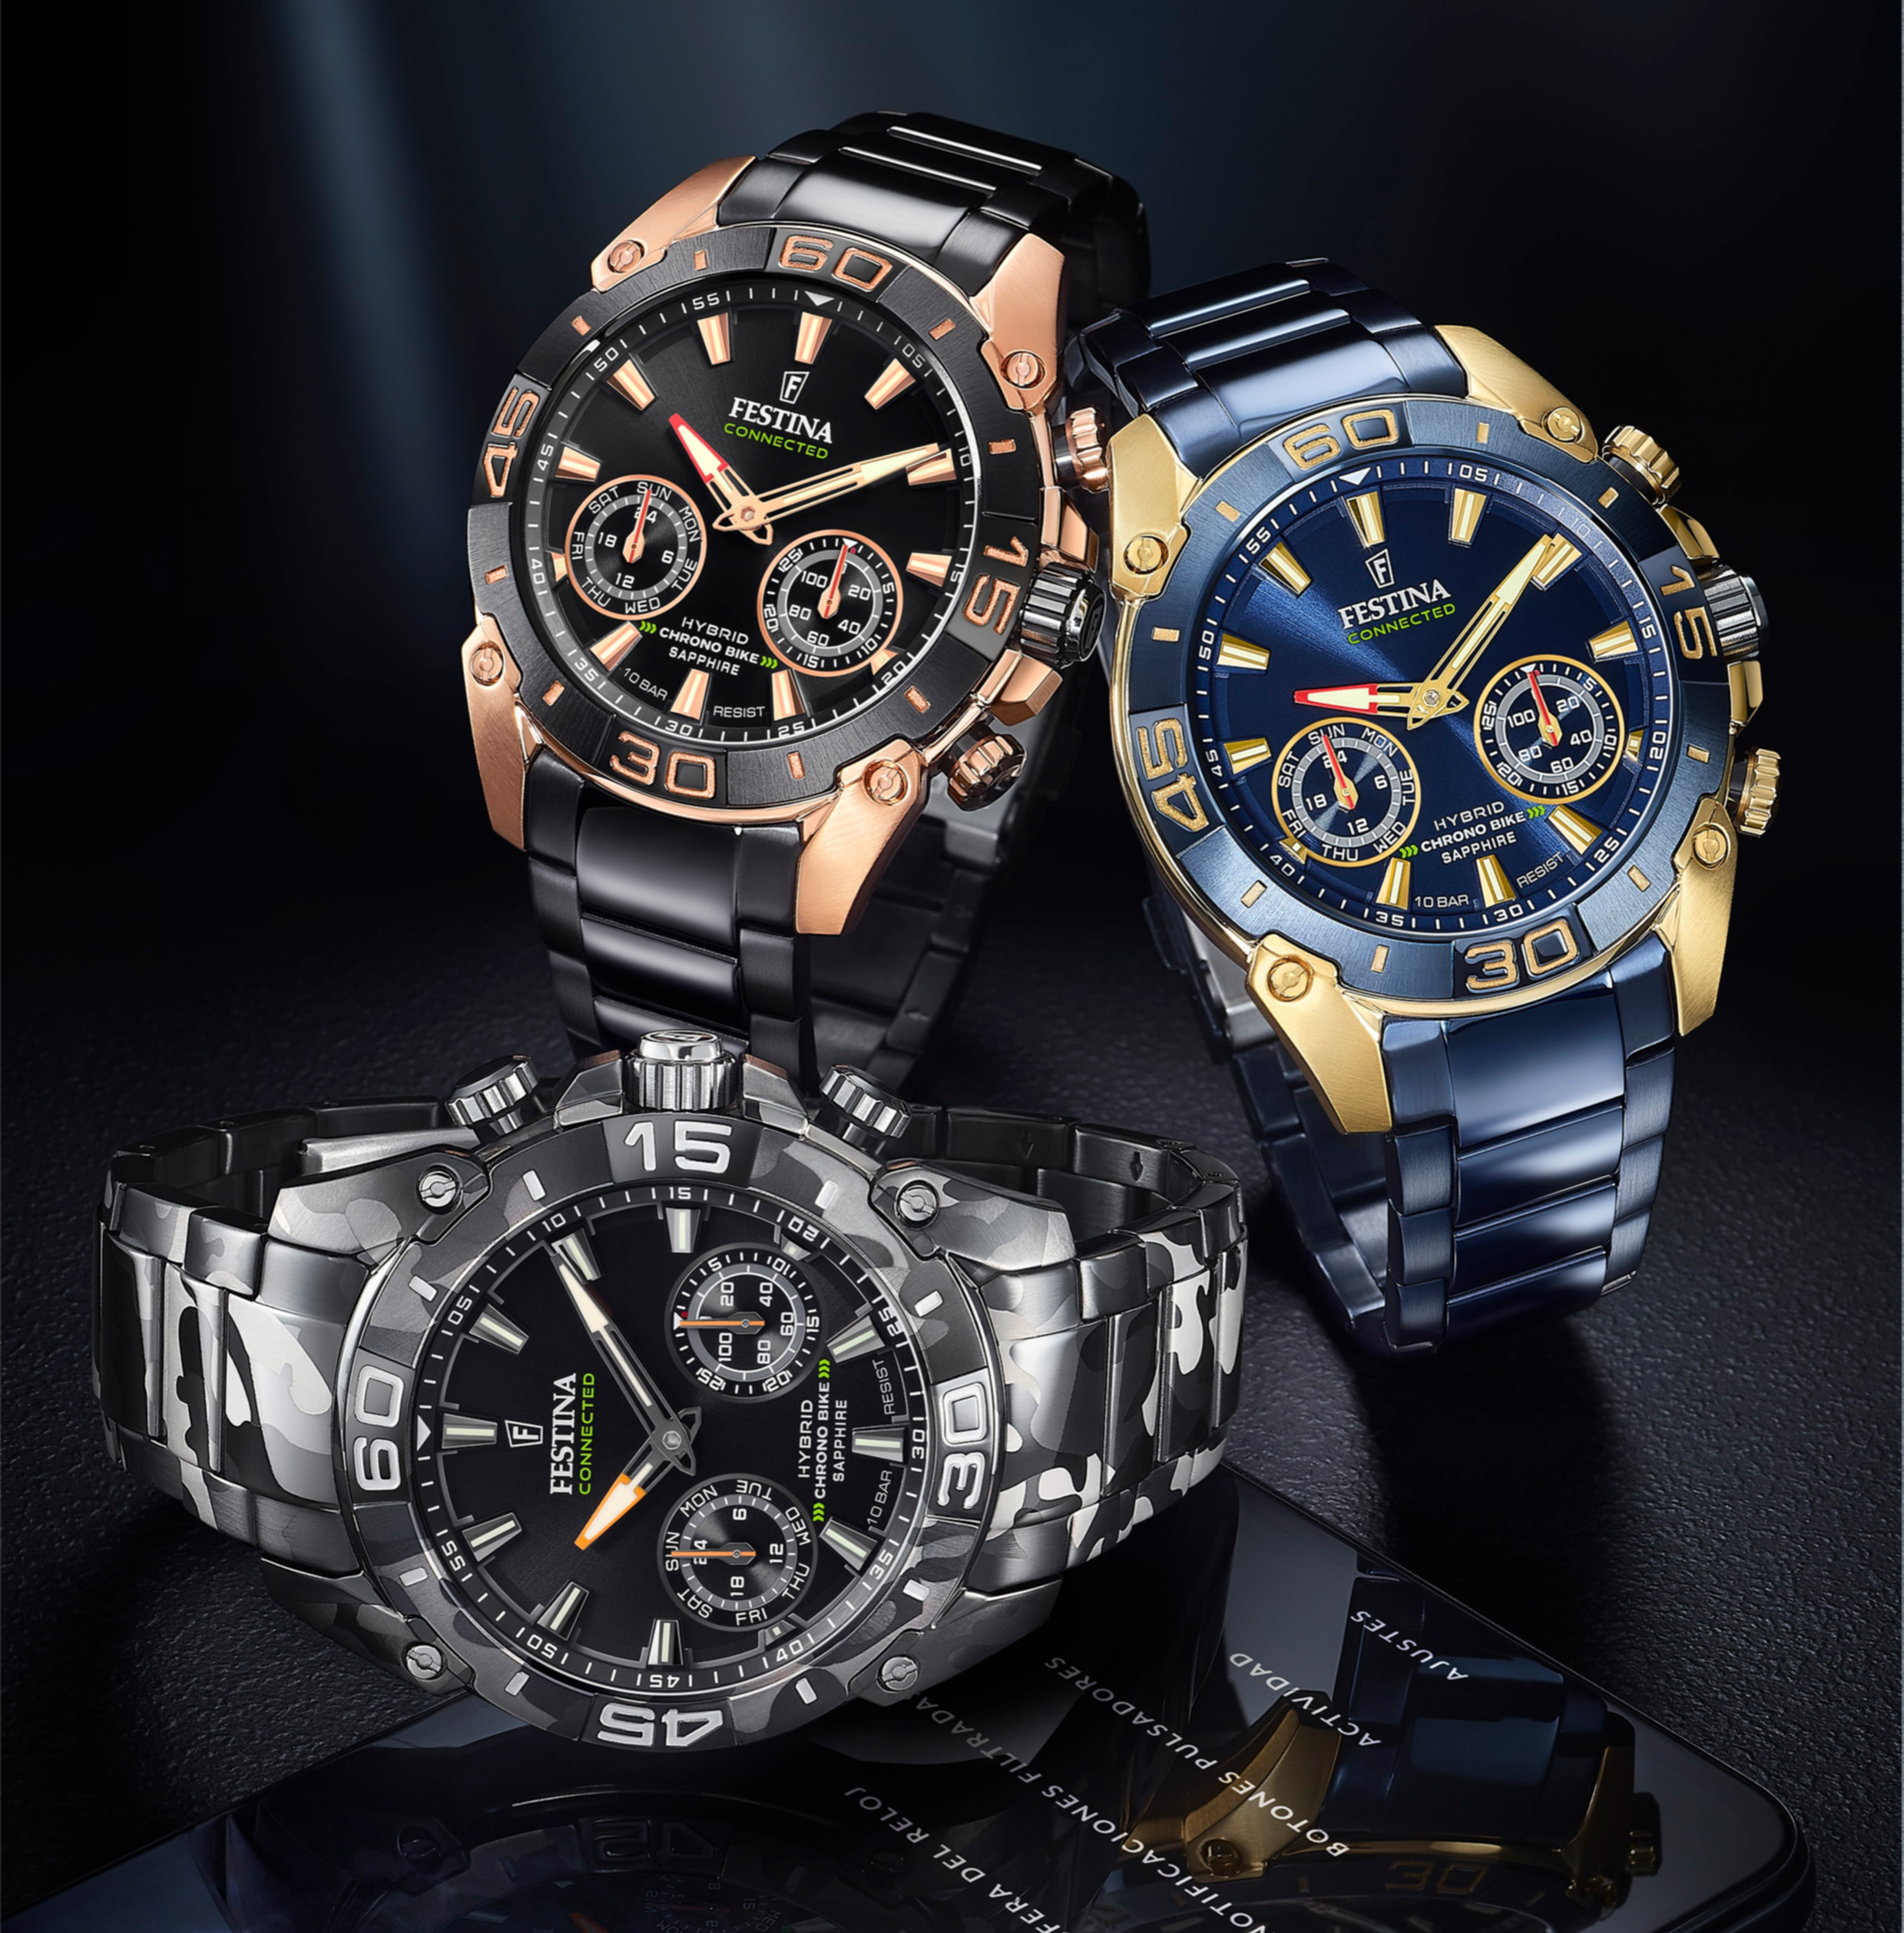 Festina Connected Special Edition